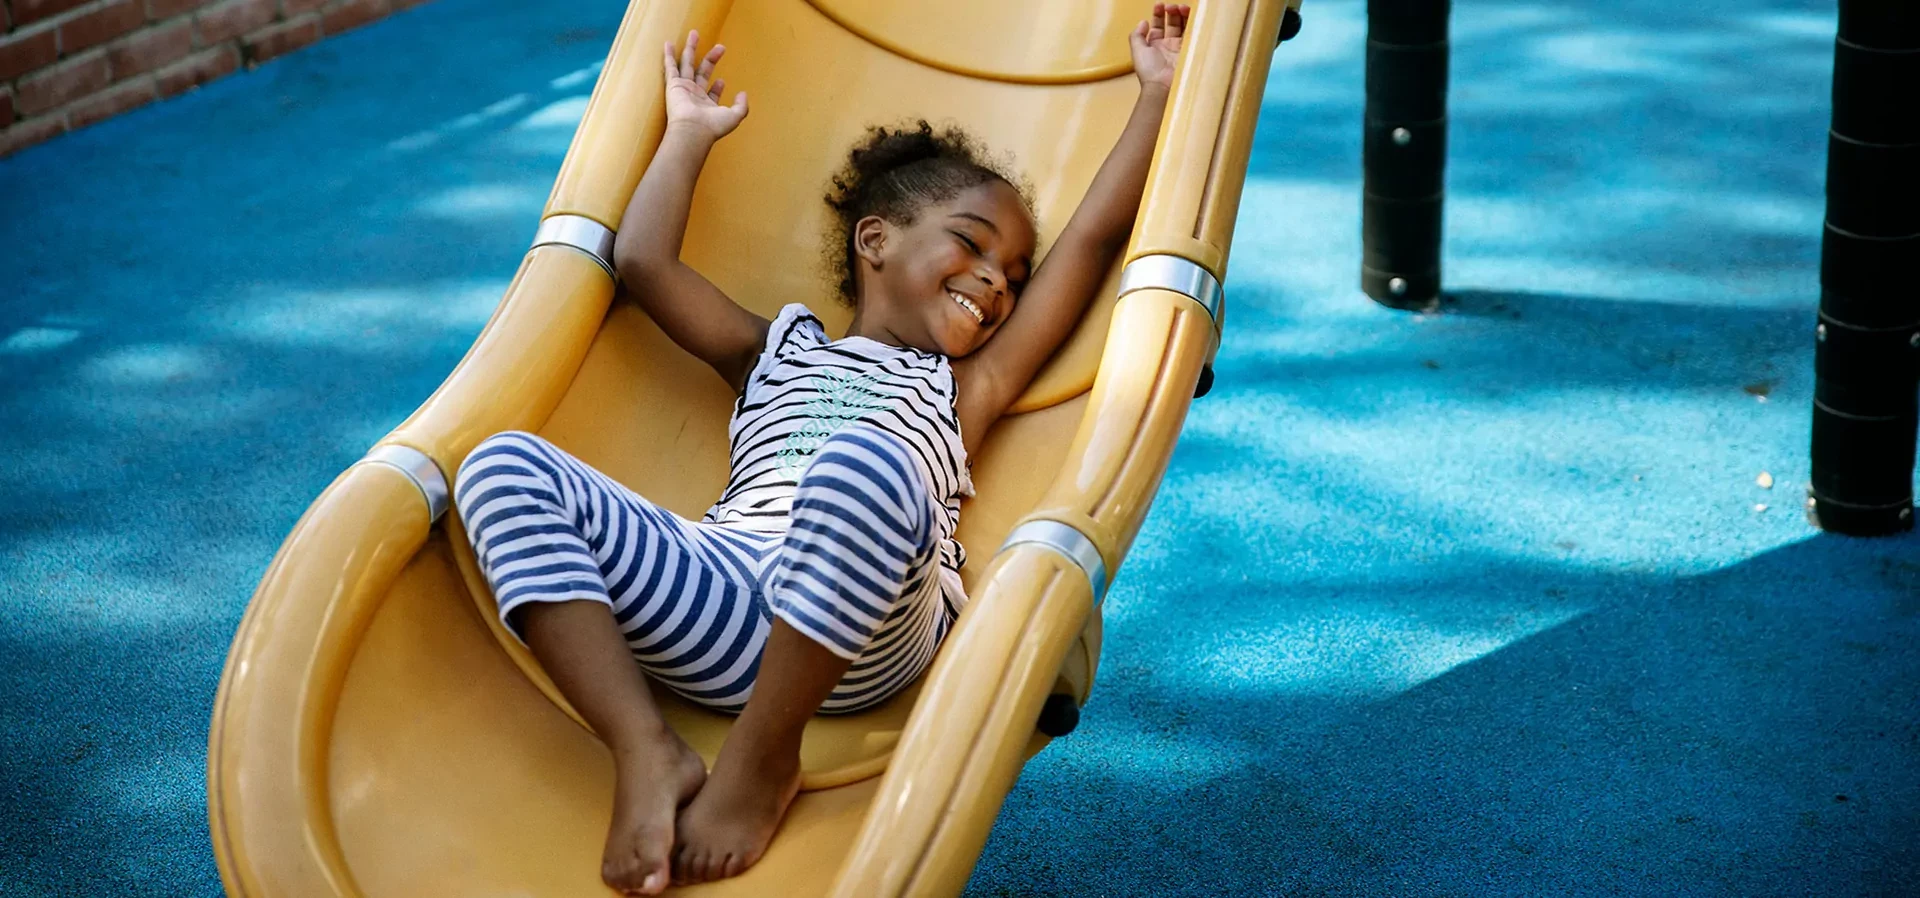 hero image of a girl sliding on a playground slide in a park